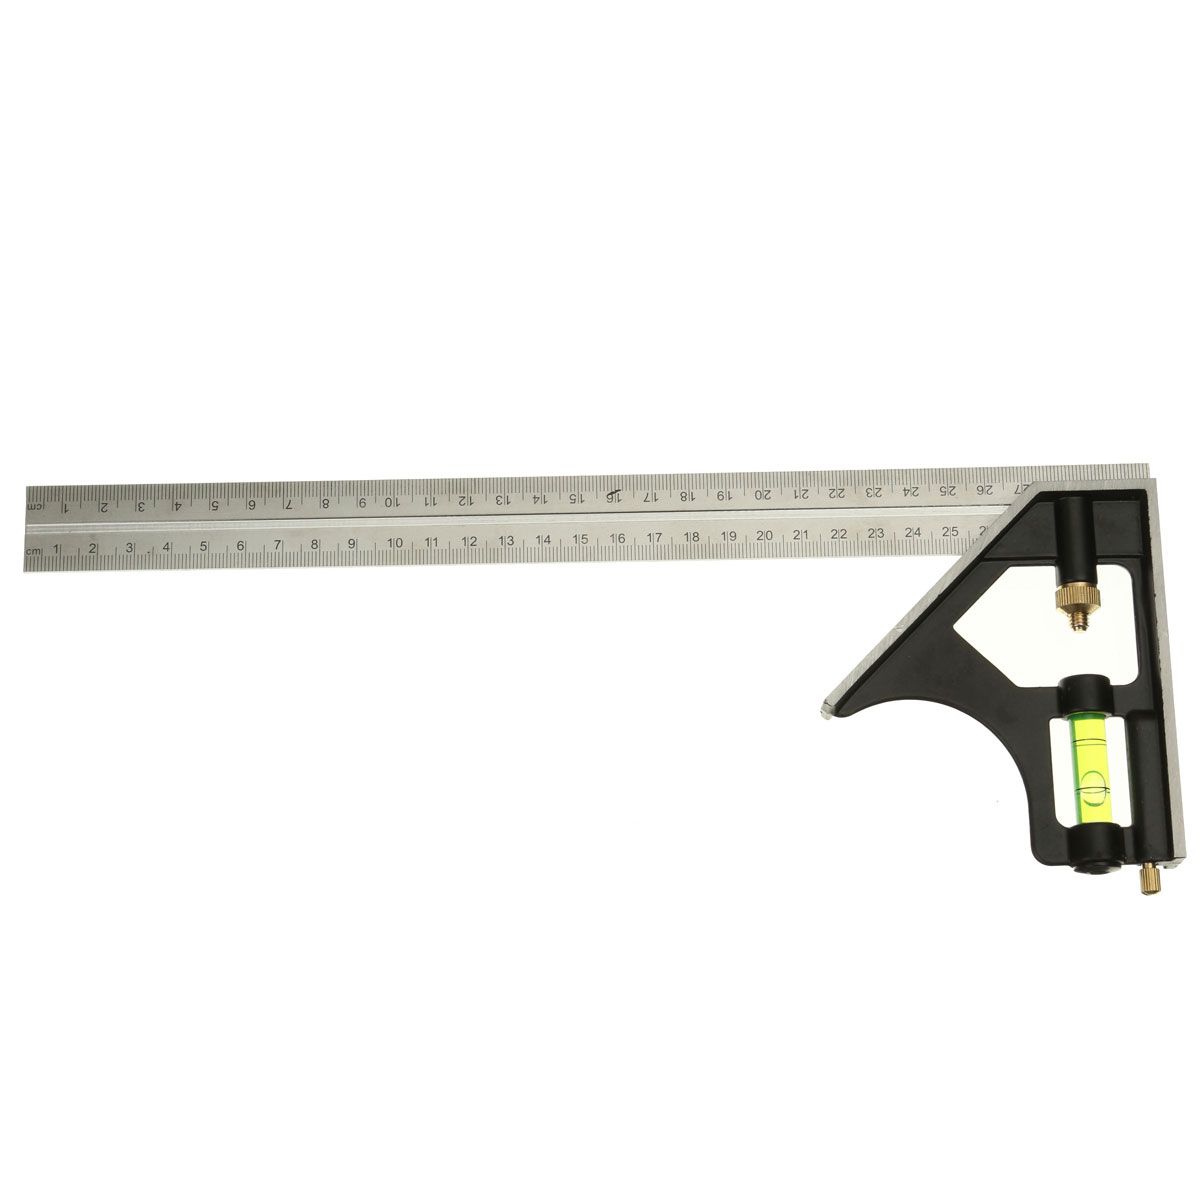 DANIU-12inch-Square-Ruler-Adjustable-Stainless-Steel-Combination-Angle-Tool-1157251